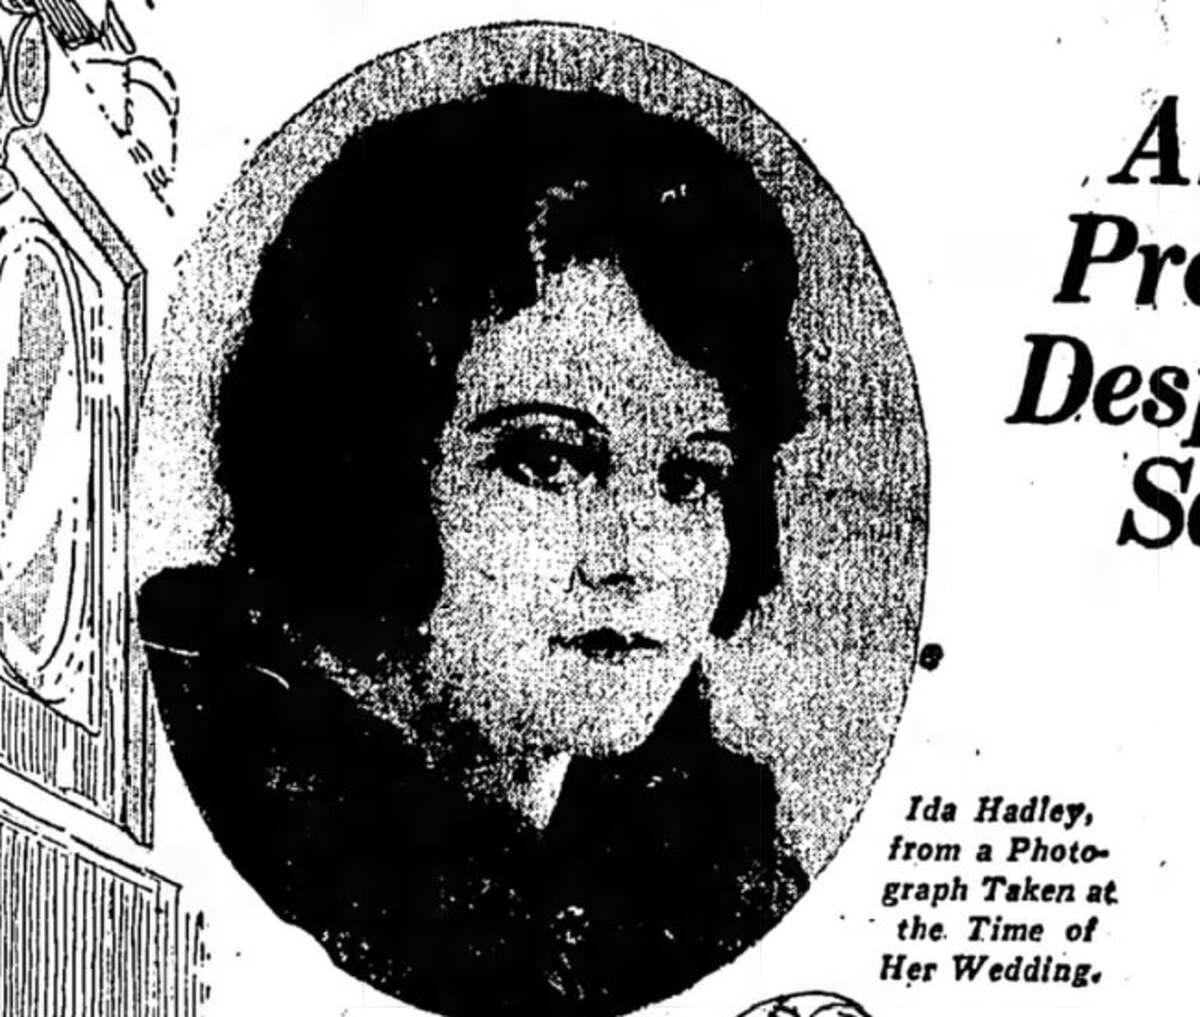 Ida Hadley on in theÂ July 16, 1922 Indianapolis Star.